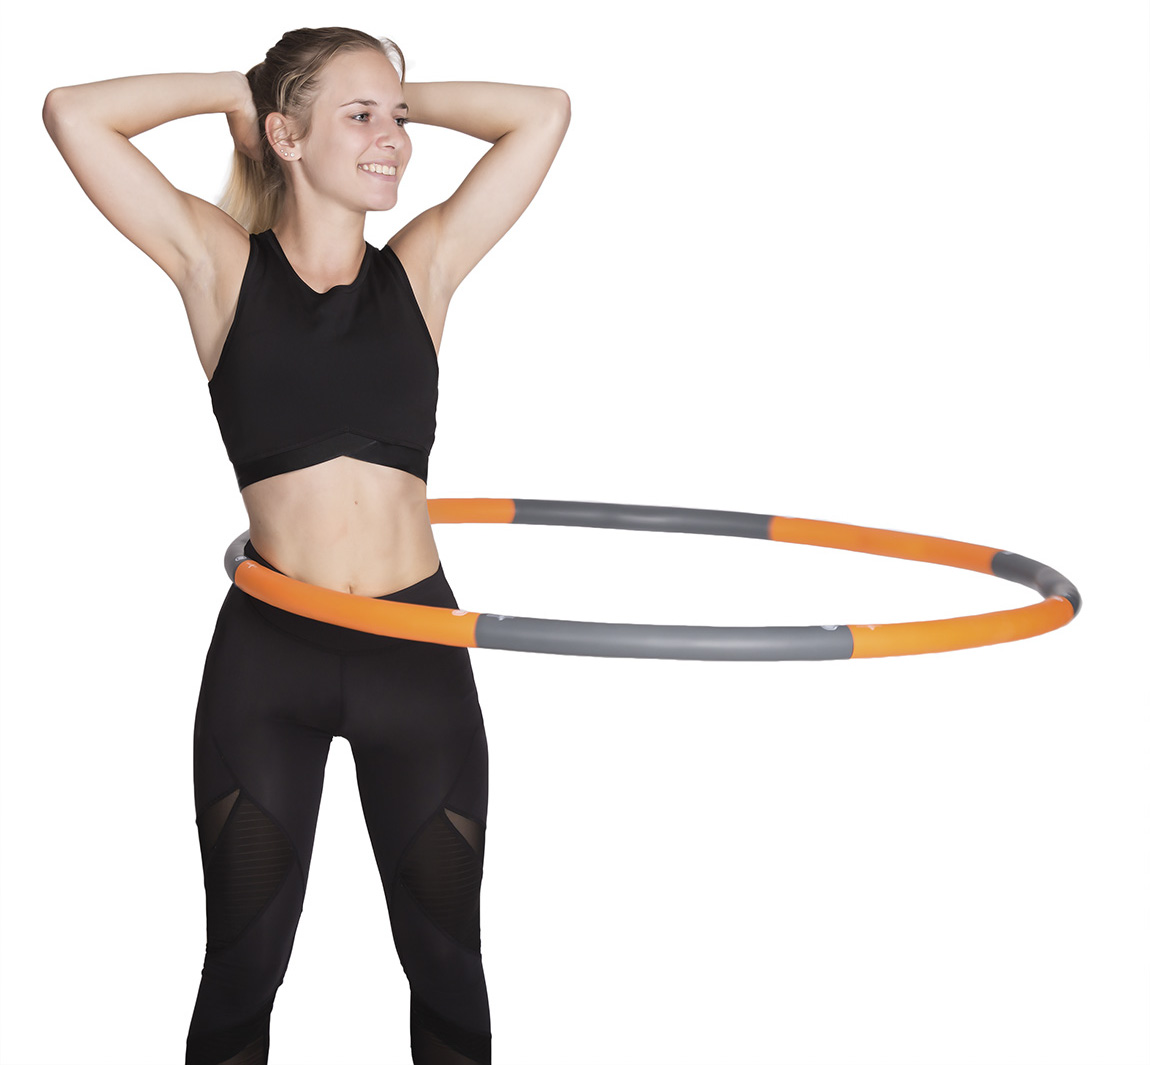 STAY FIT WITH HOOPOMANIA HULA HOOPS